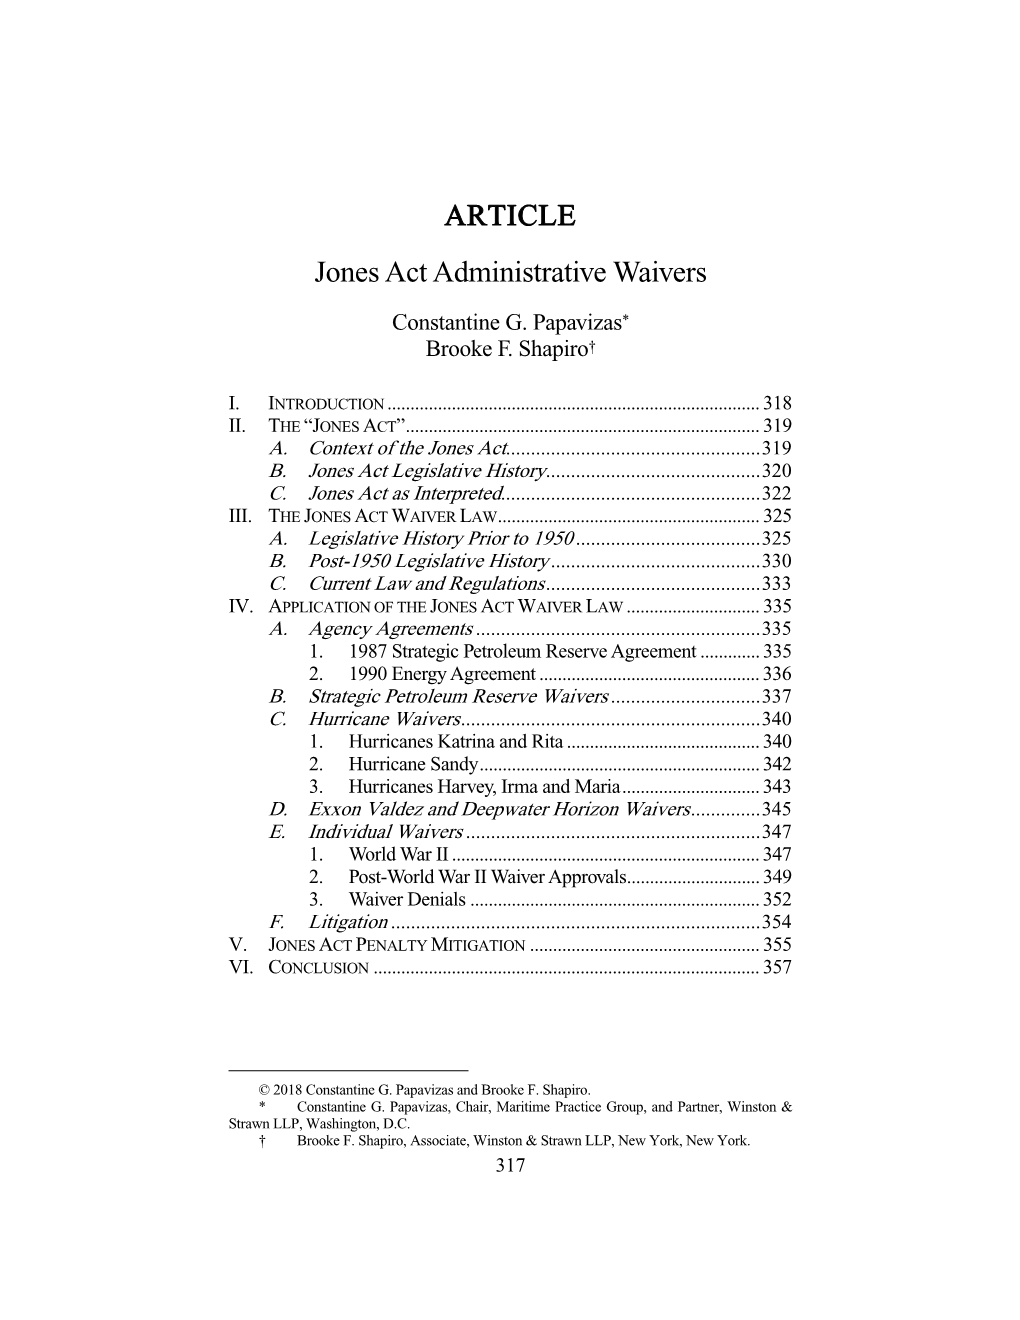 ARTICLE Jones Act Administrative Waivers